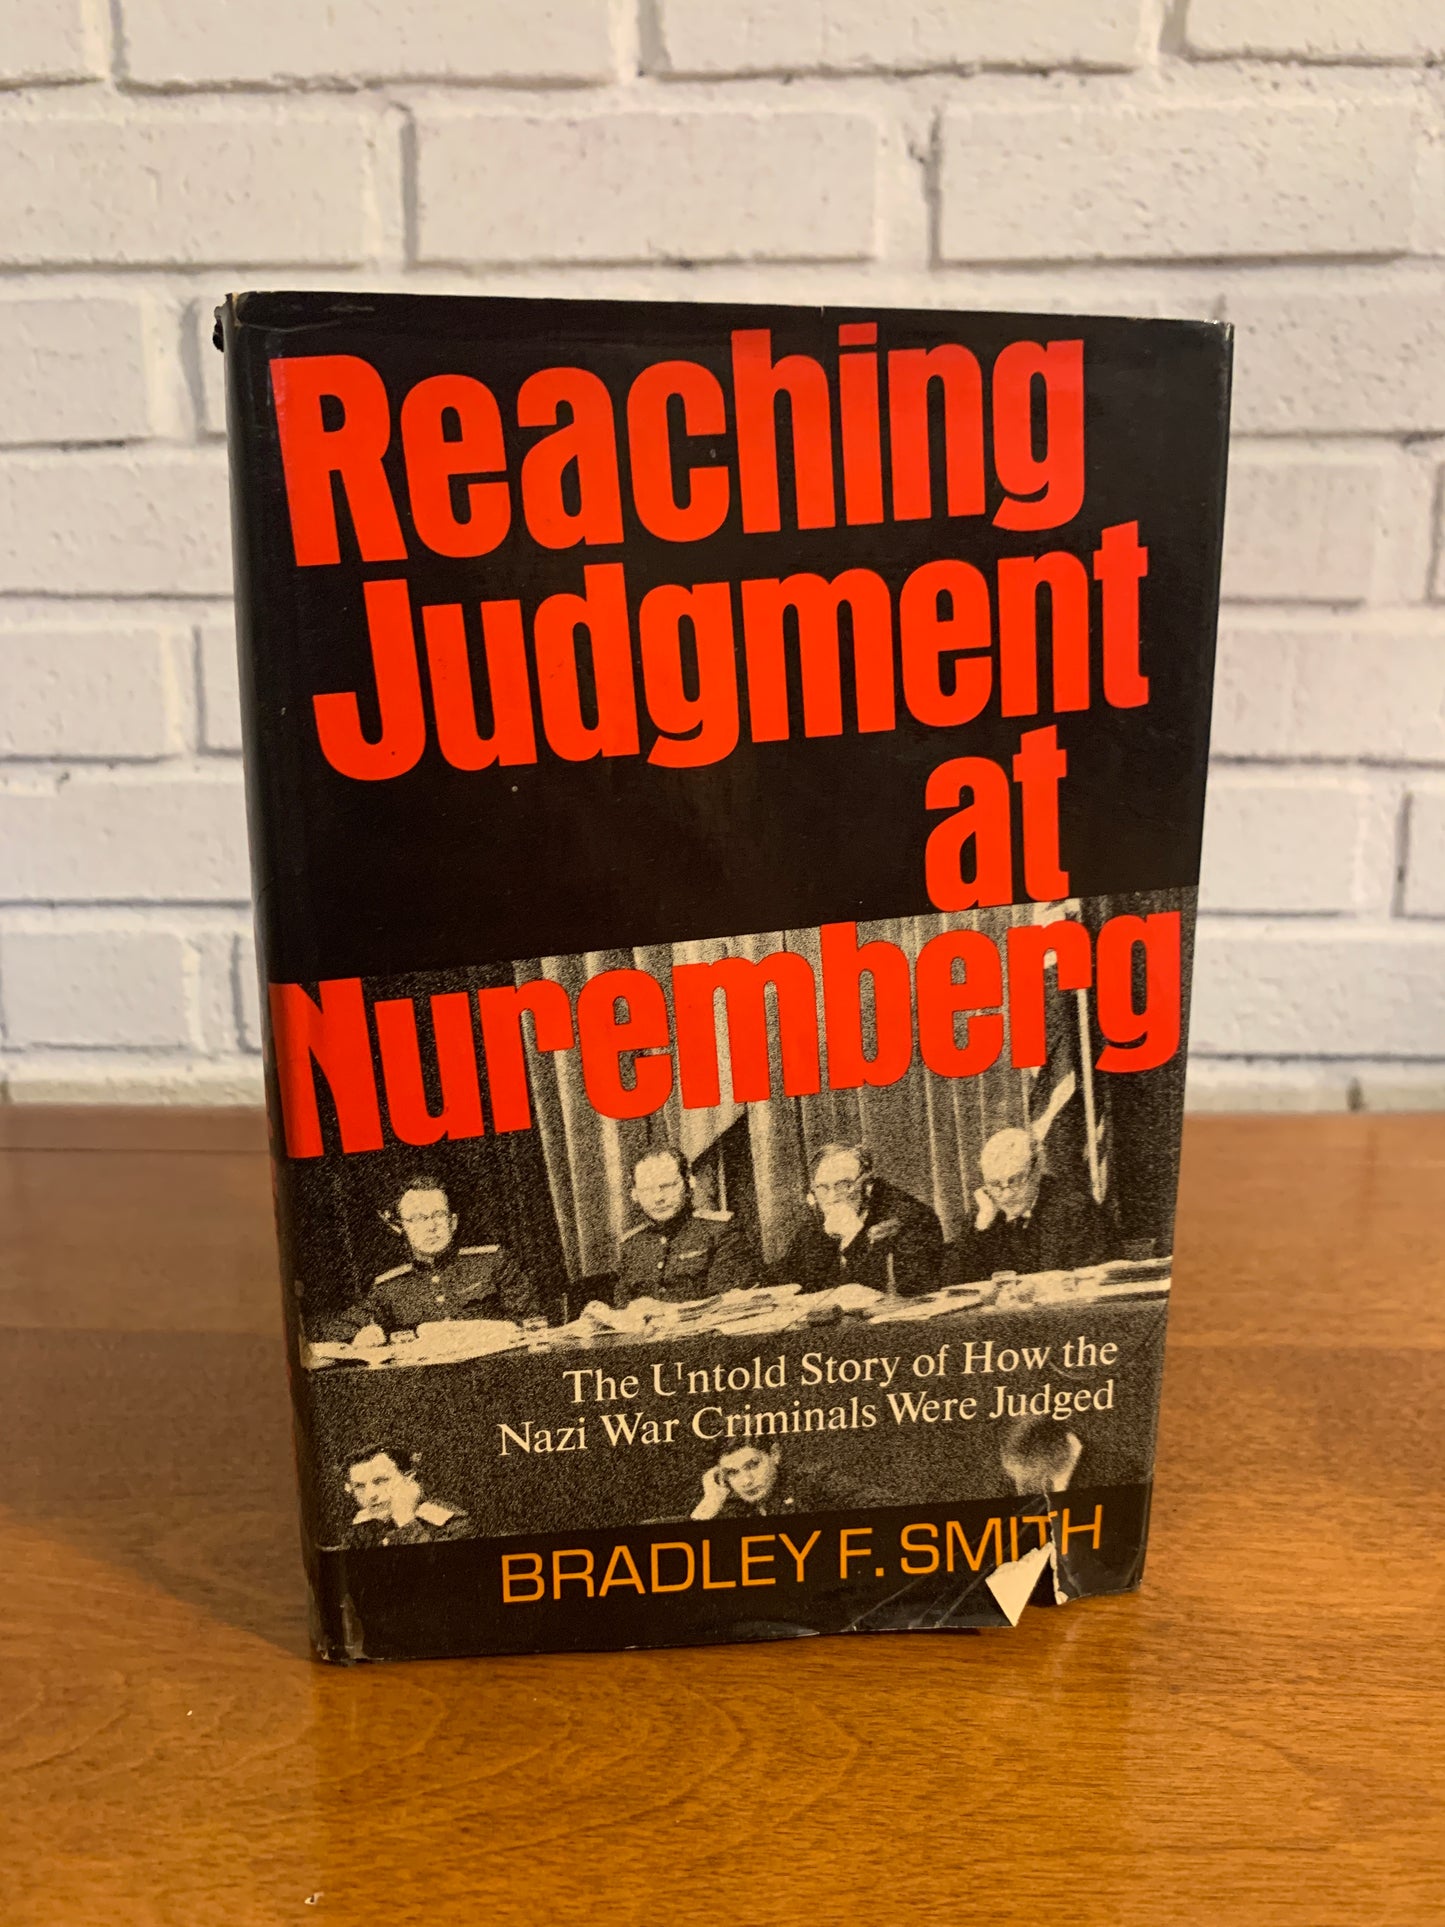 Reaching Judgment At Nuremberg by Bradley F Smith, 1977